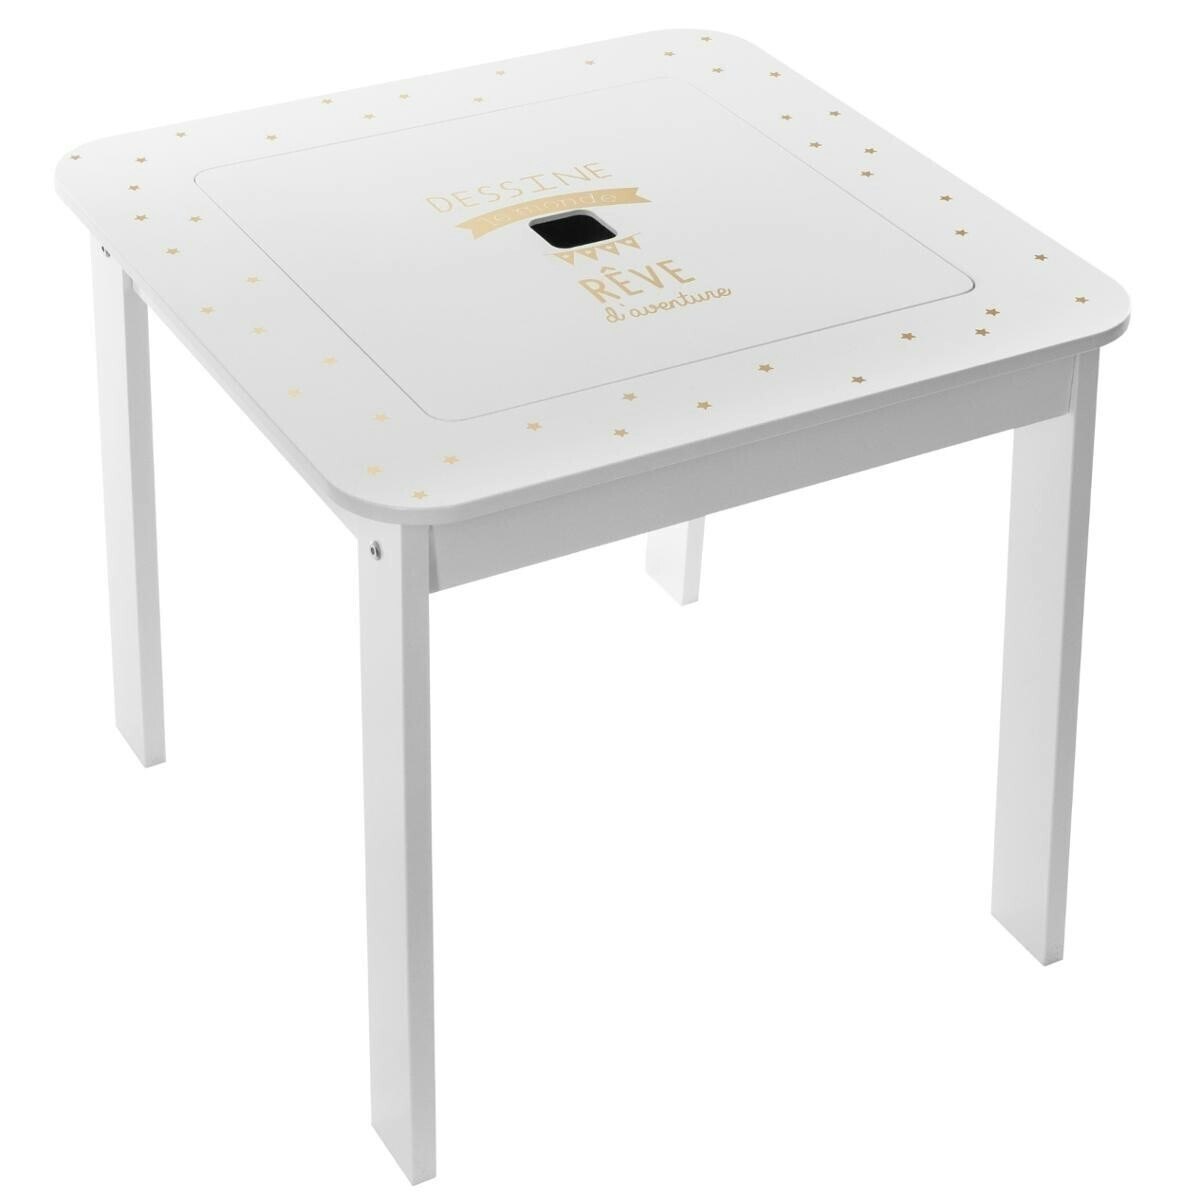 Furniture set table with two stools, white/gold 